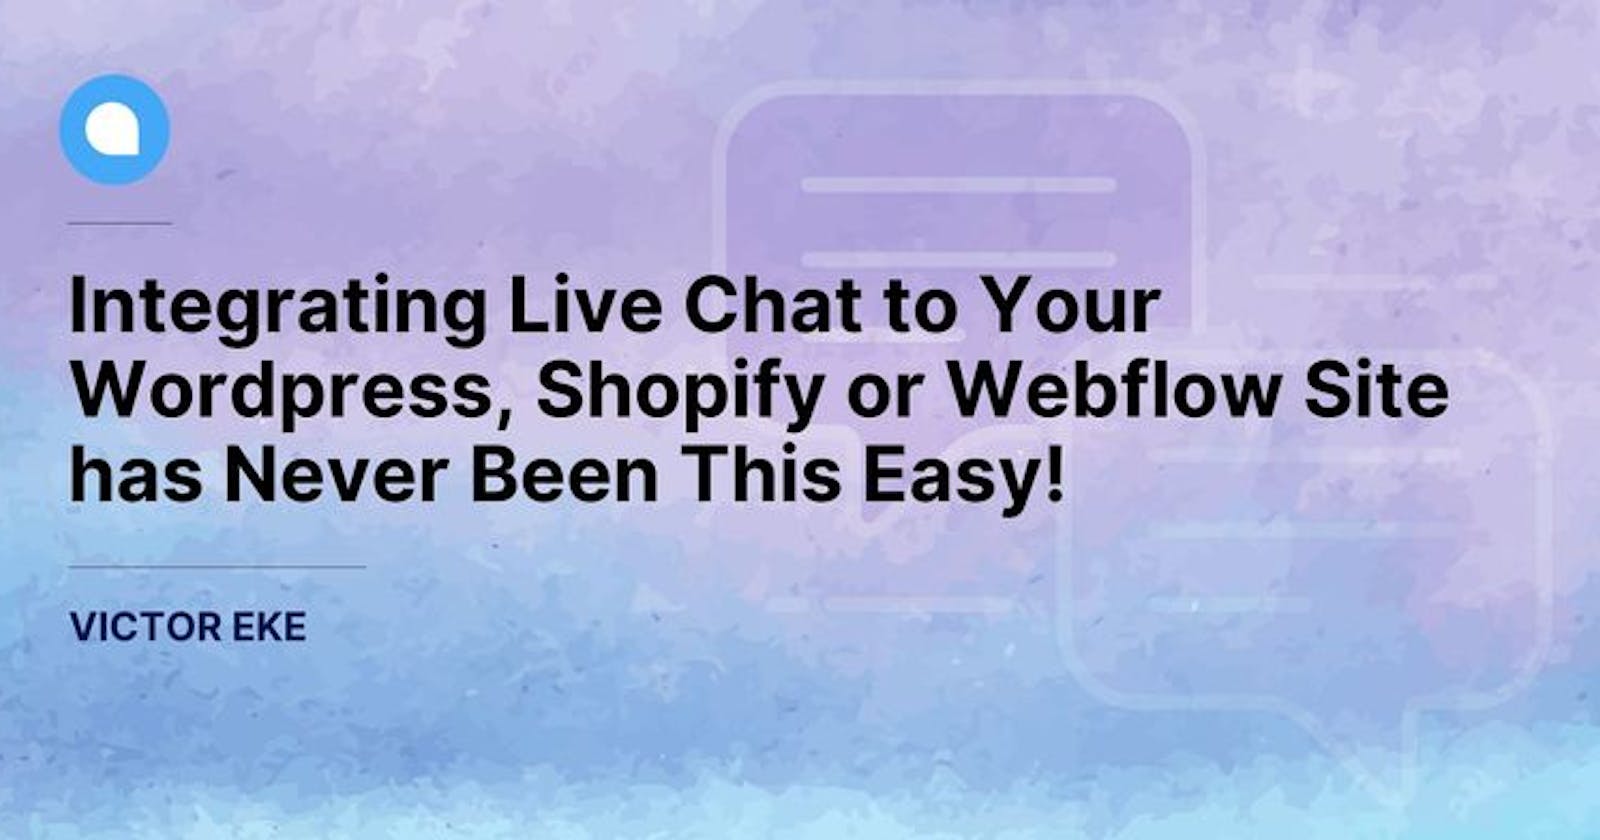 Integrating Live Chat to Your WordPress, Shopify or Webflow Site Has Never Been this Easy!